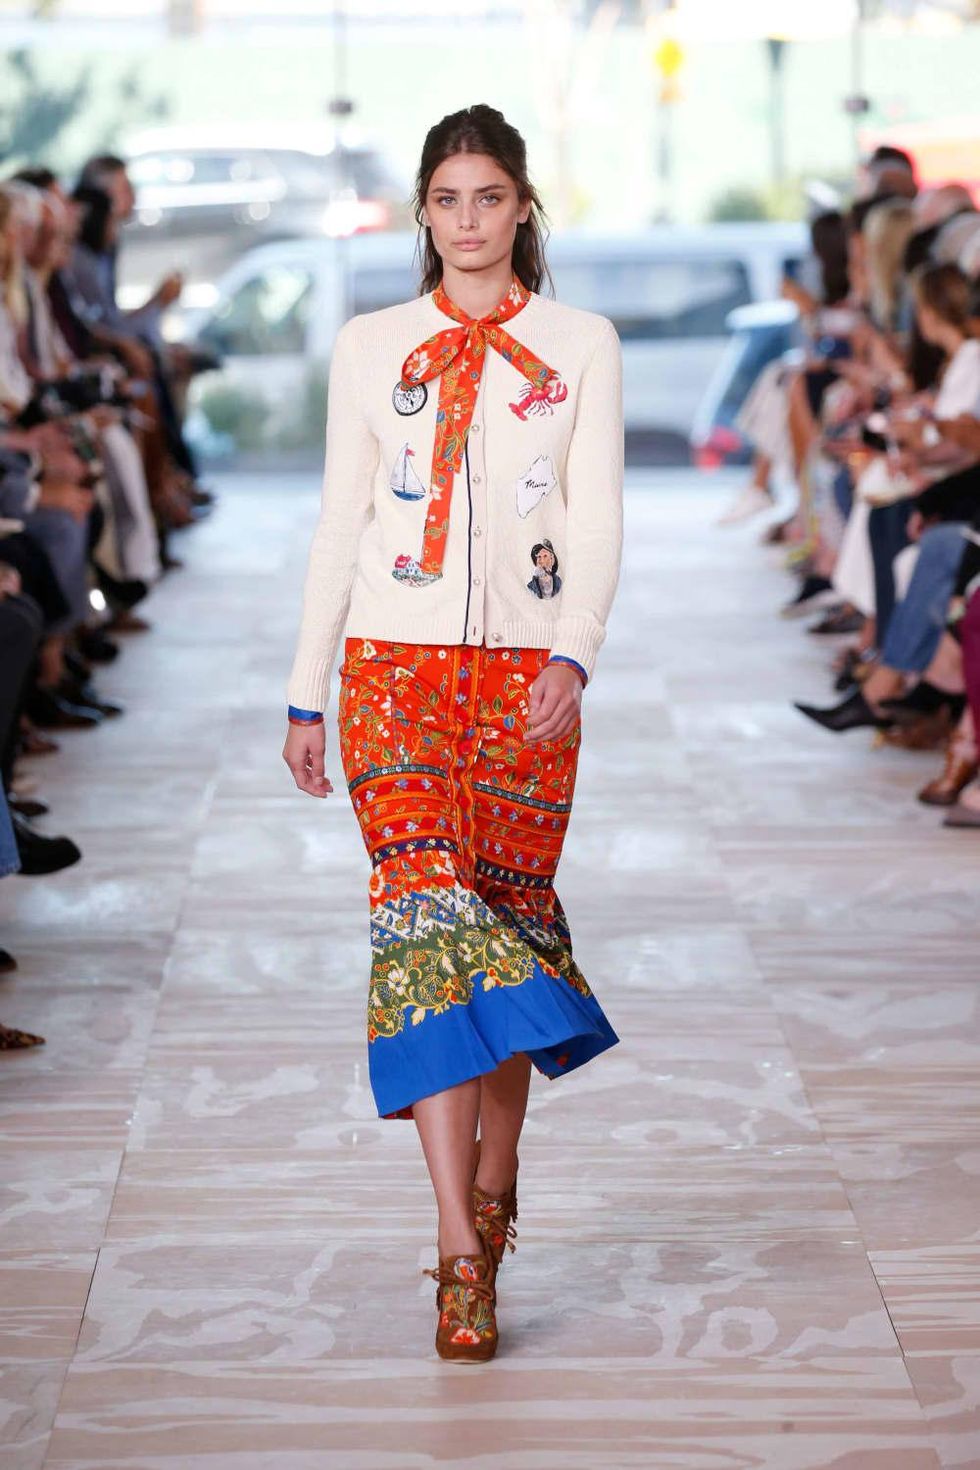 Tory Burch S/S 2011 Collection